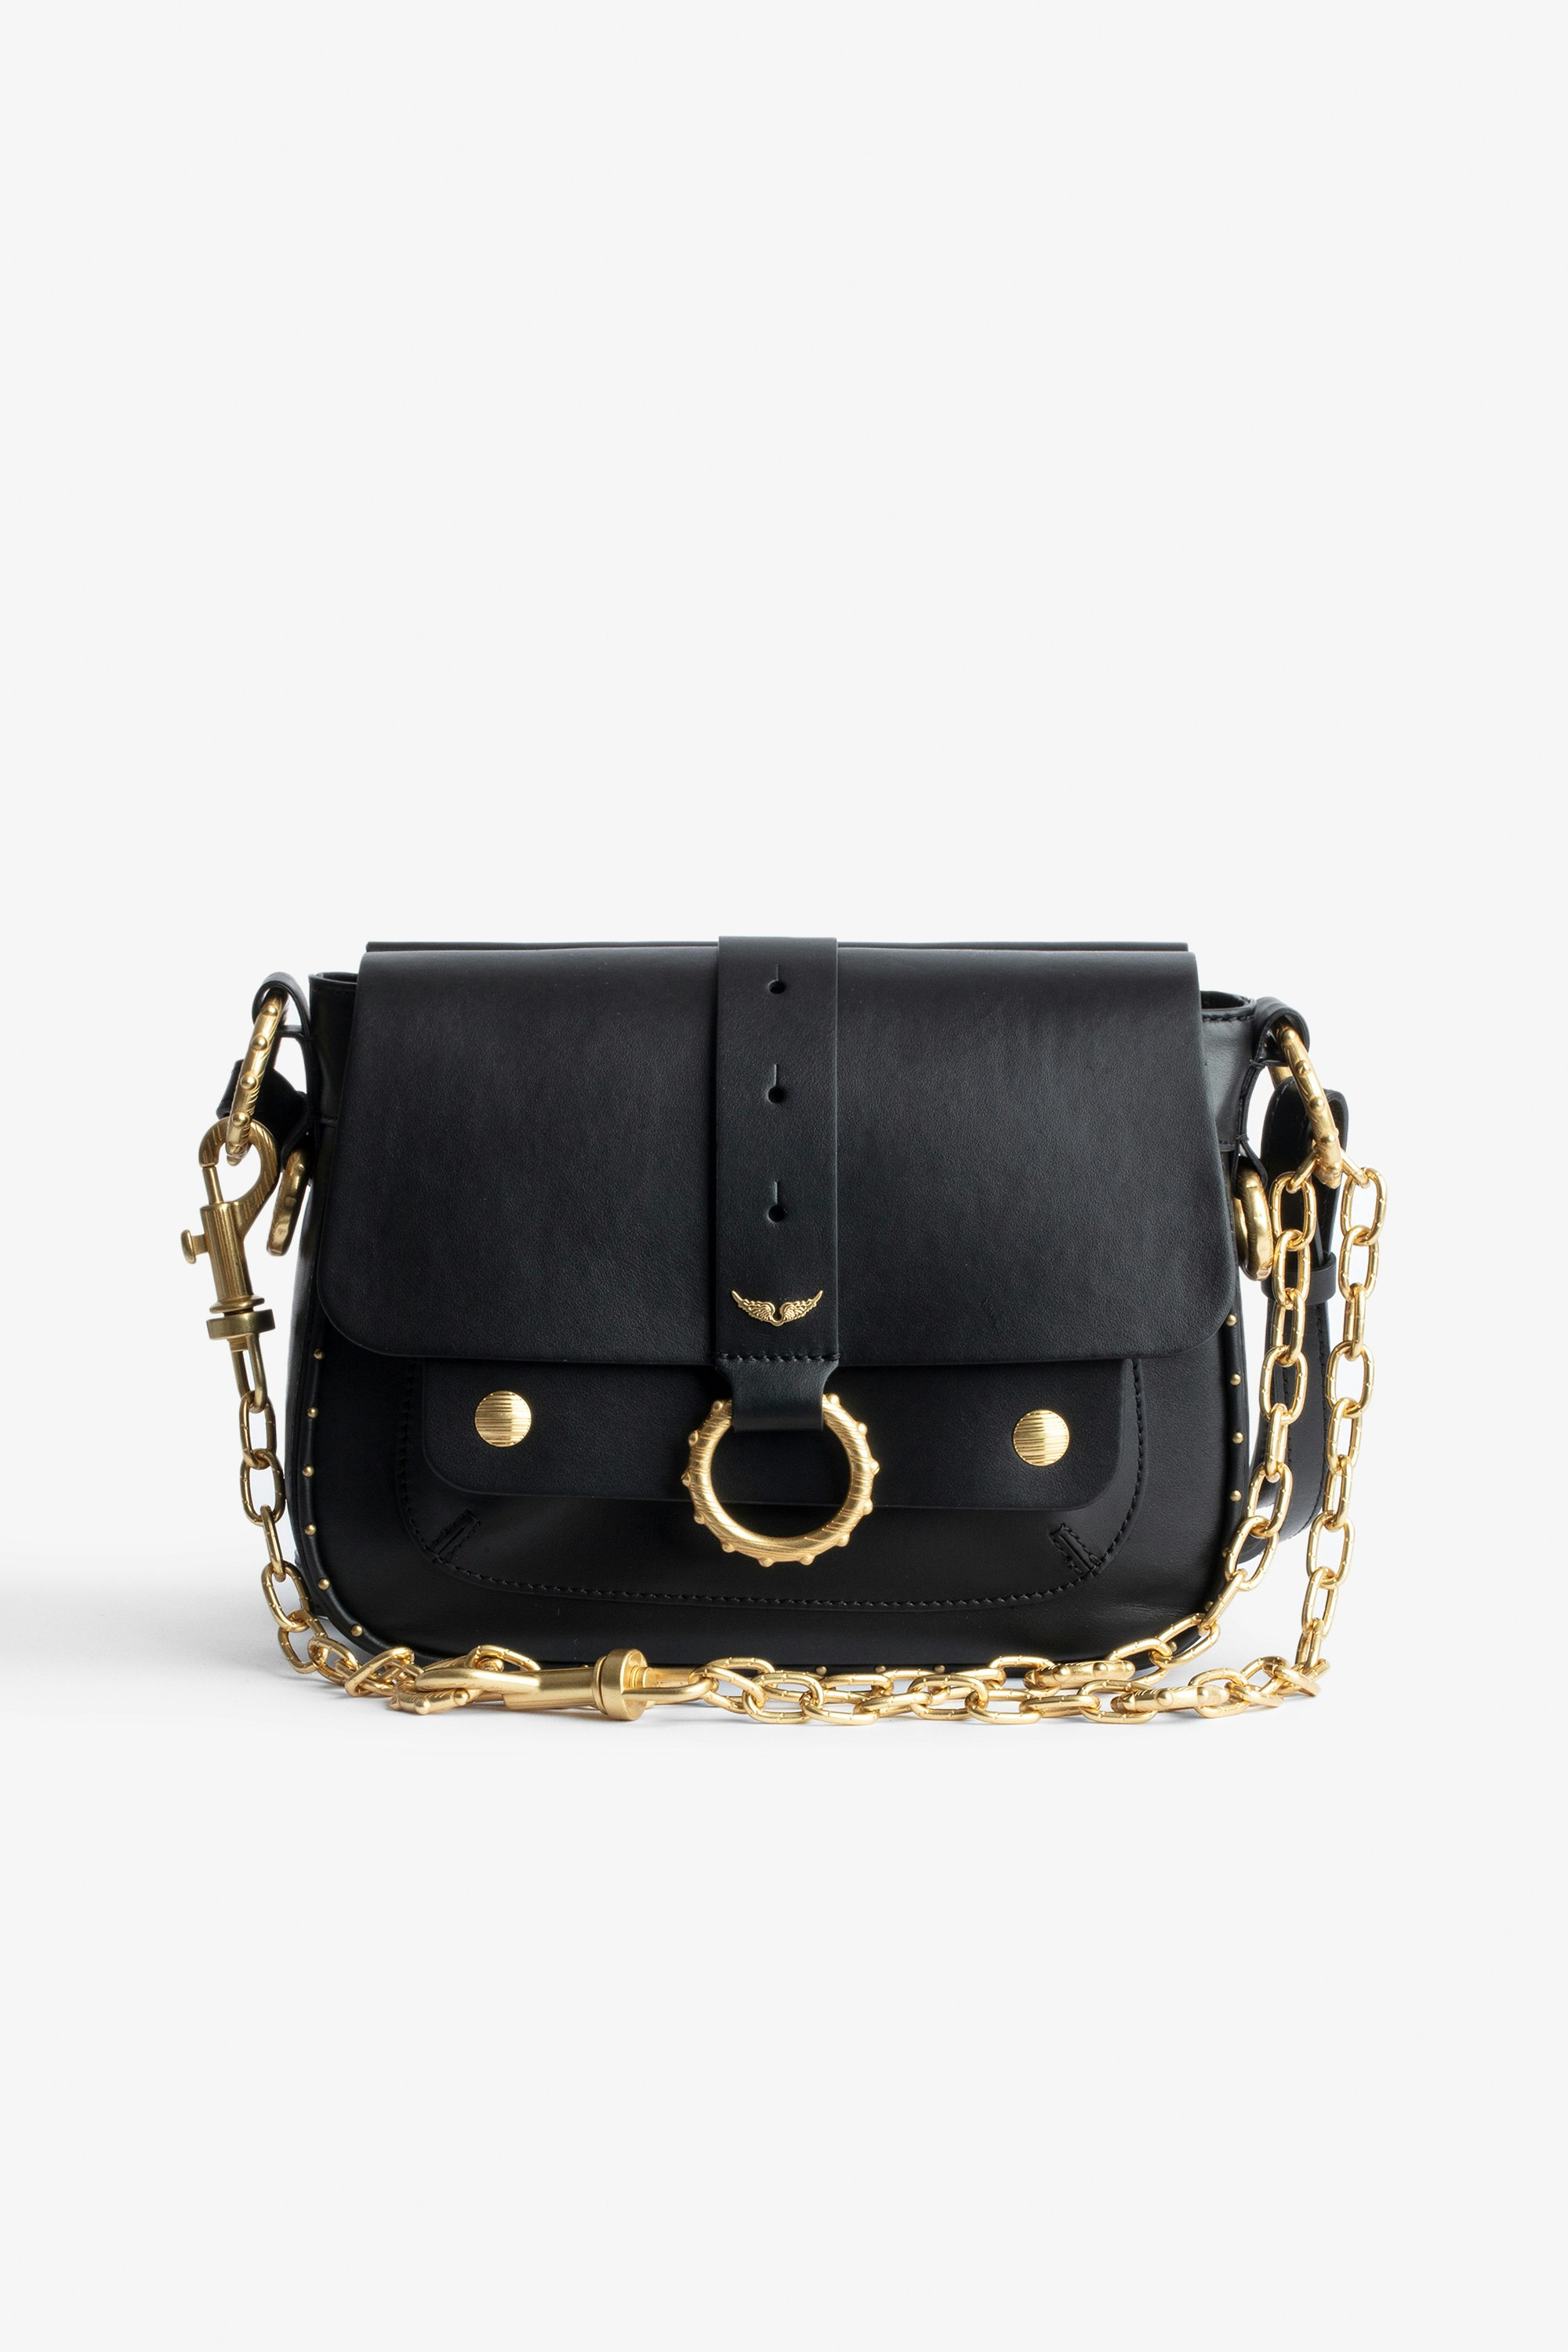 Kate Bag - Women’s black grained leather bag with gold-toned chains.